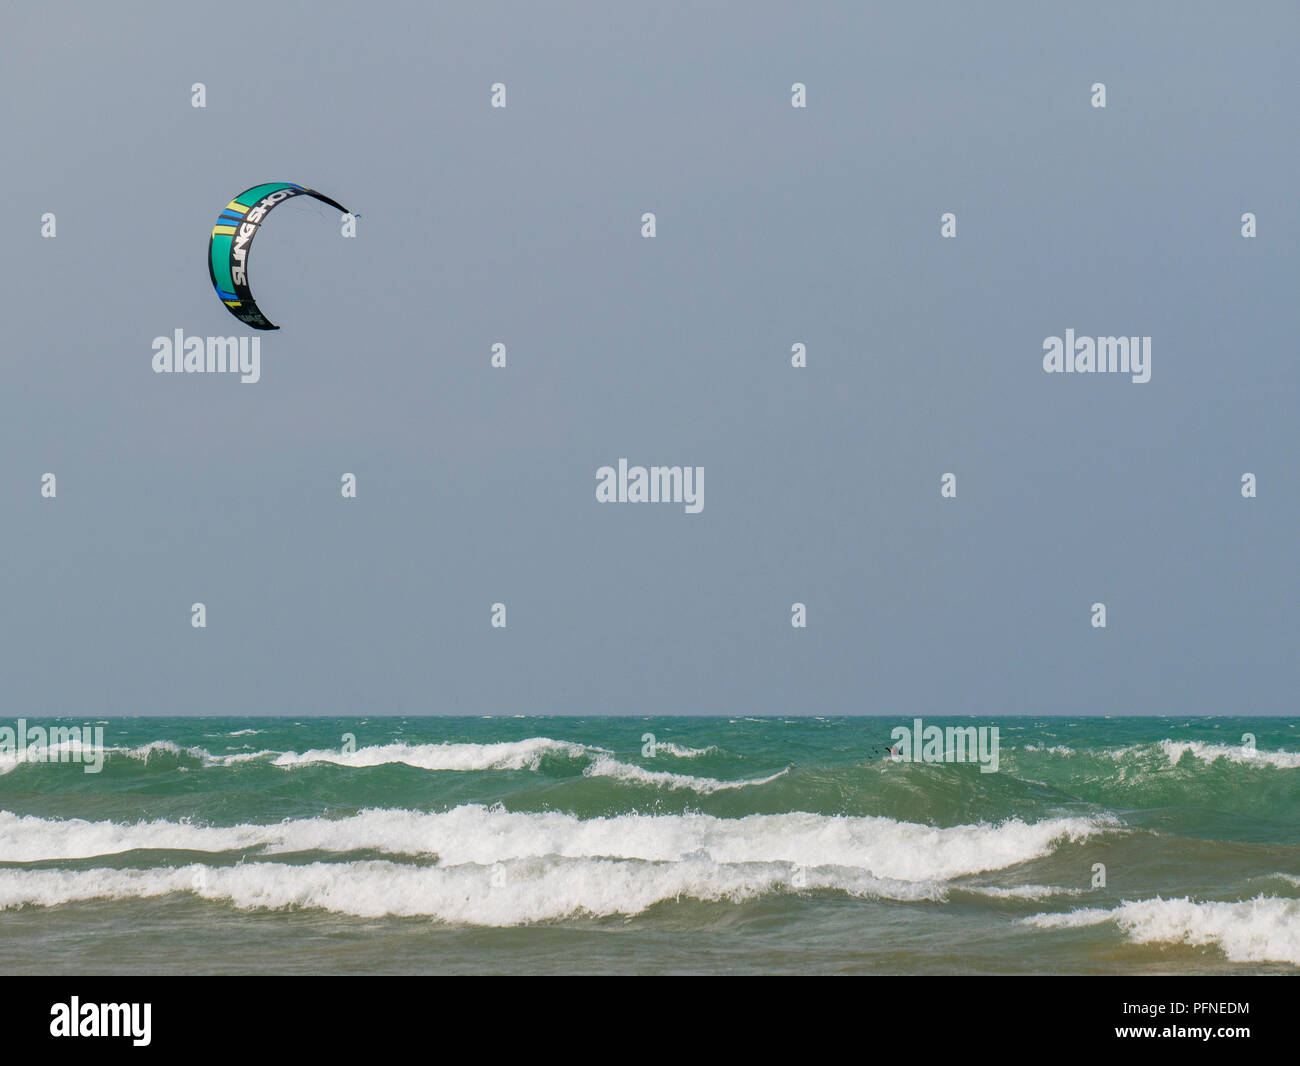 Chicago, Illinois, USA. 21st August 2018. A kite surfer mostly hidden behind a wave braves the surf at Montrose Beach. Stiff northeast winds whipped up surf on Lake Michigan, bringing out kayakers, kite surfers and wave watchers. Credit: Todd Bannor/Alamy Live News Stock Photo